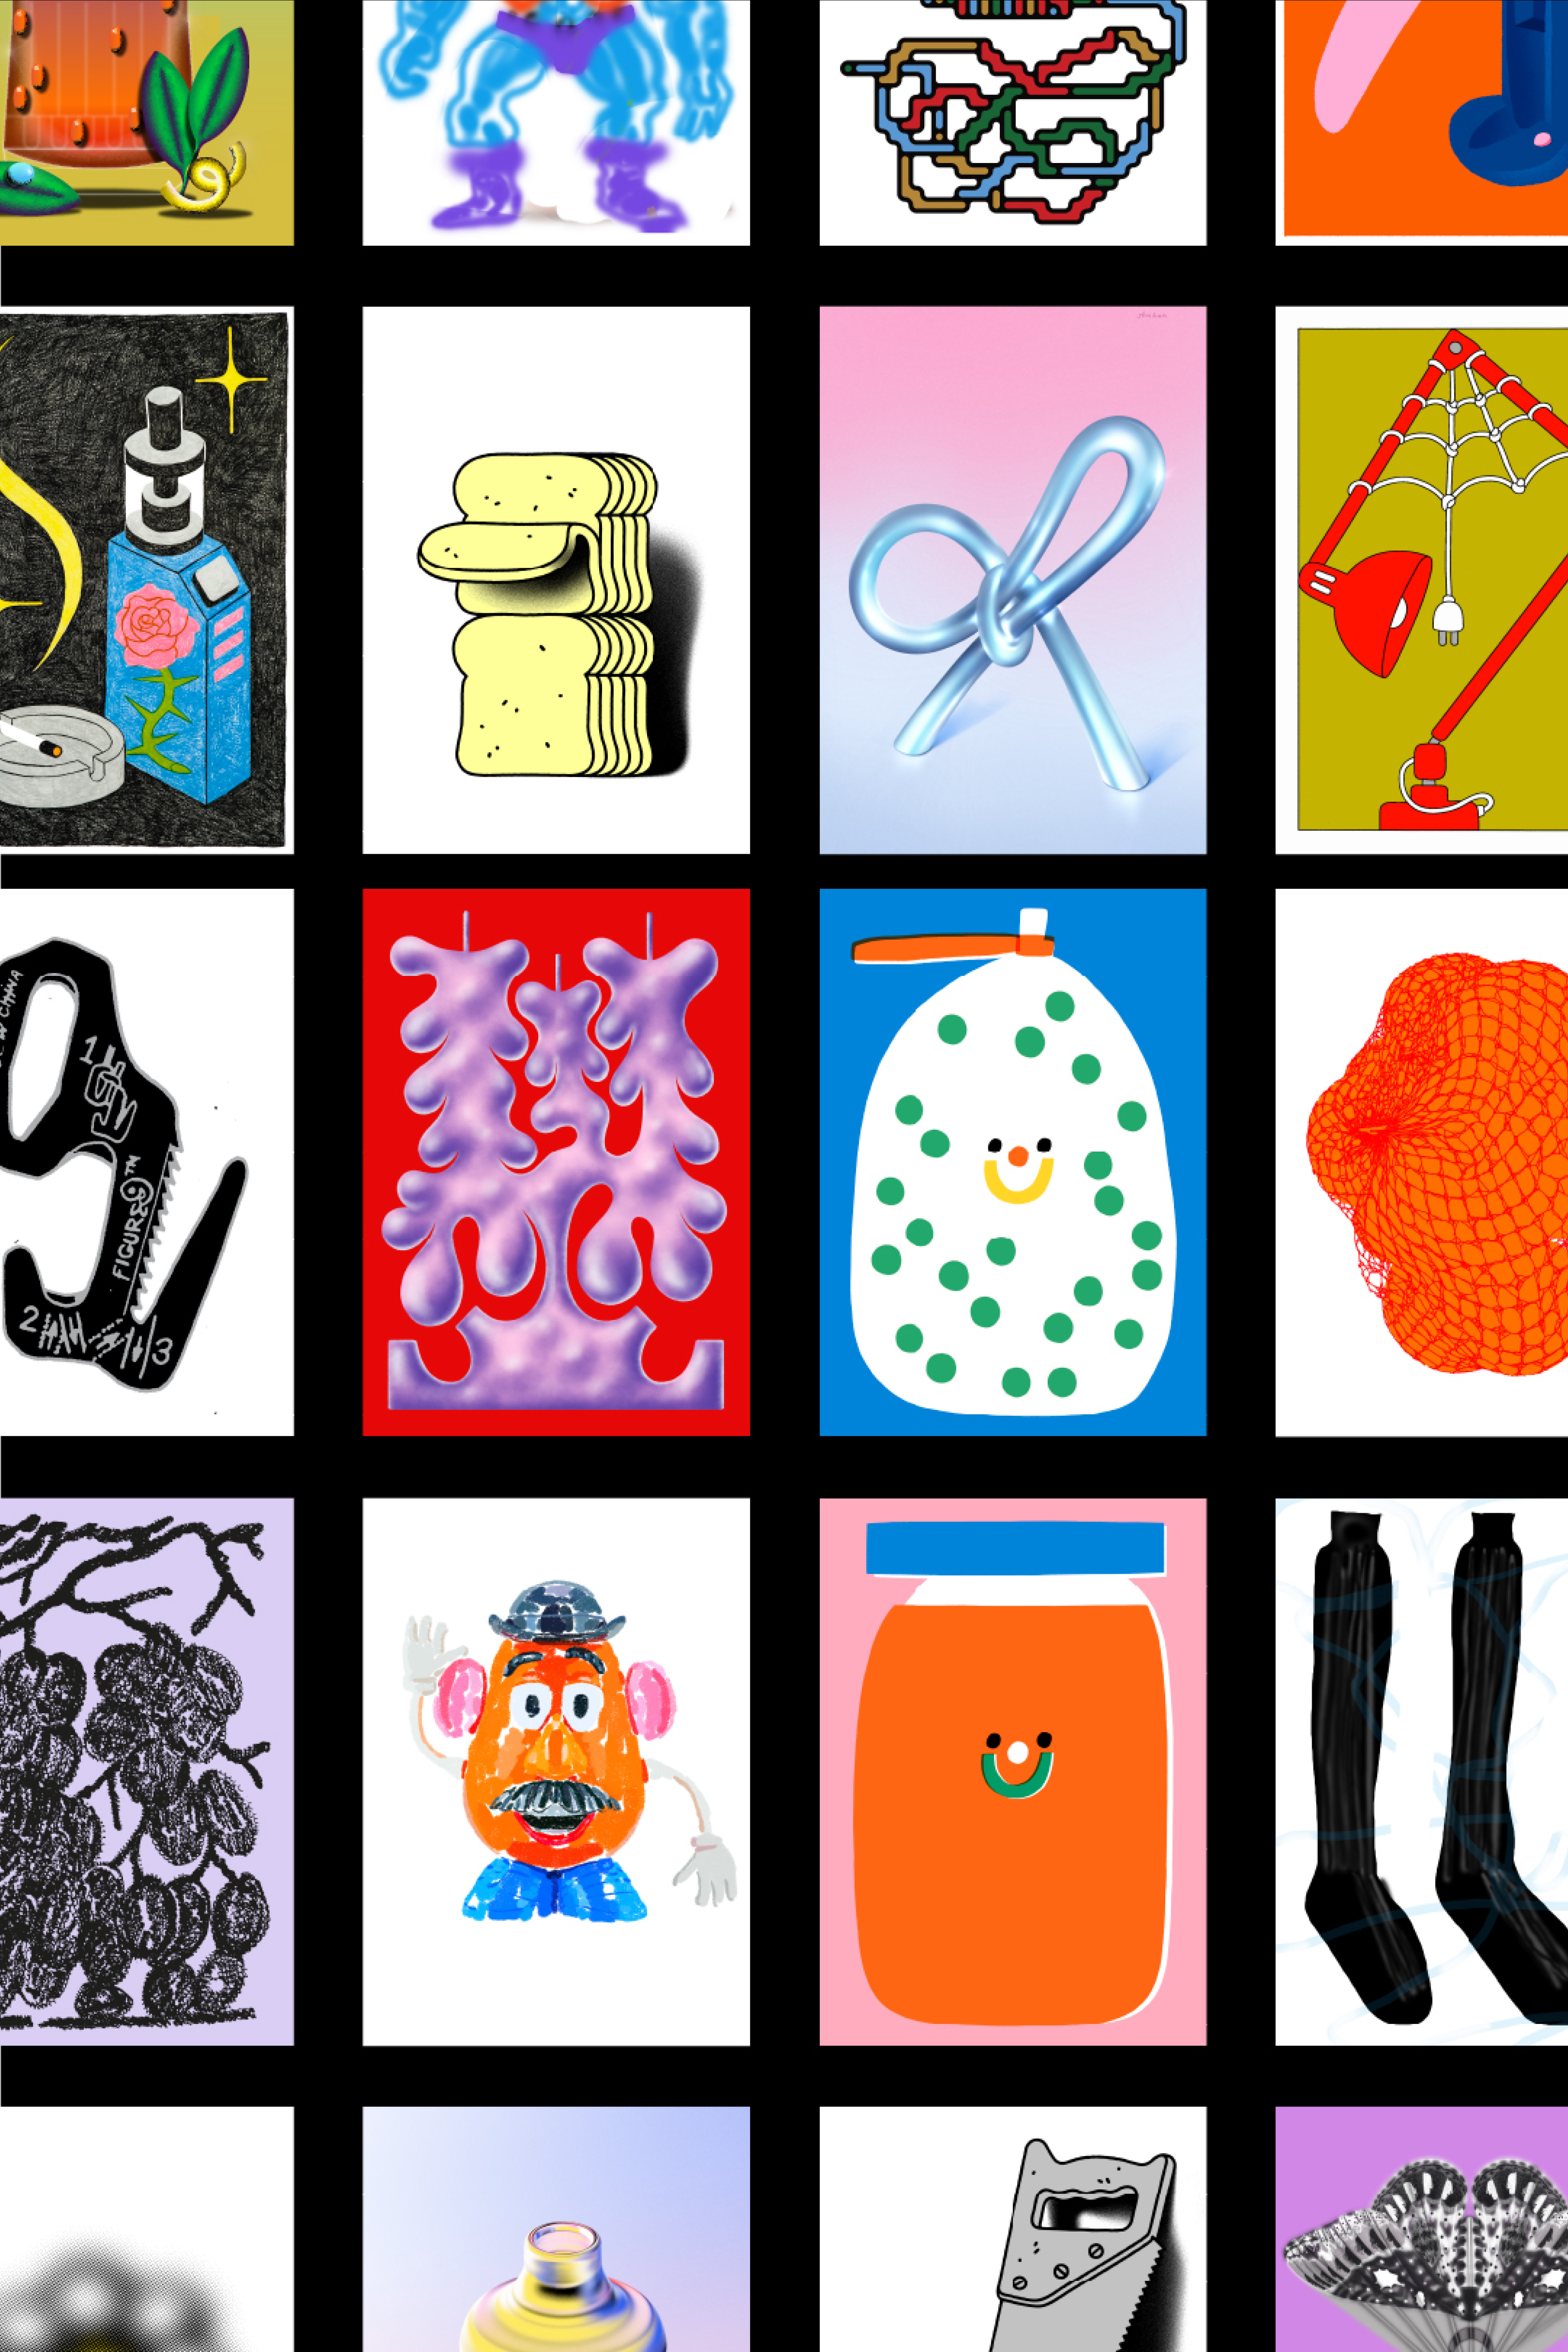 Multiple colorful illustrations of objects on a black background.